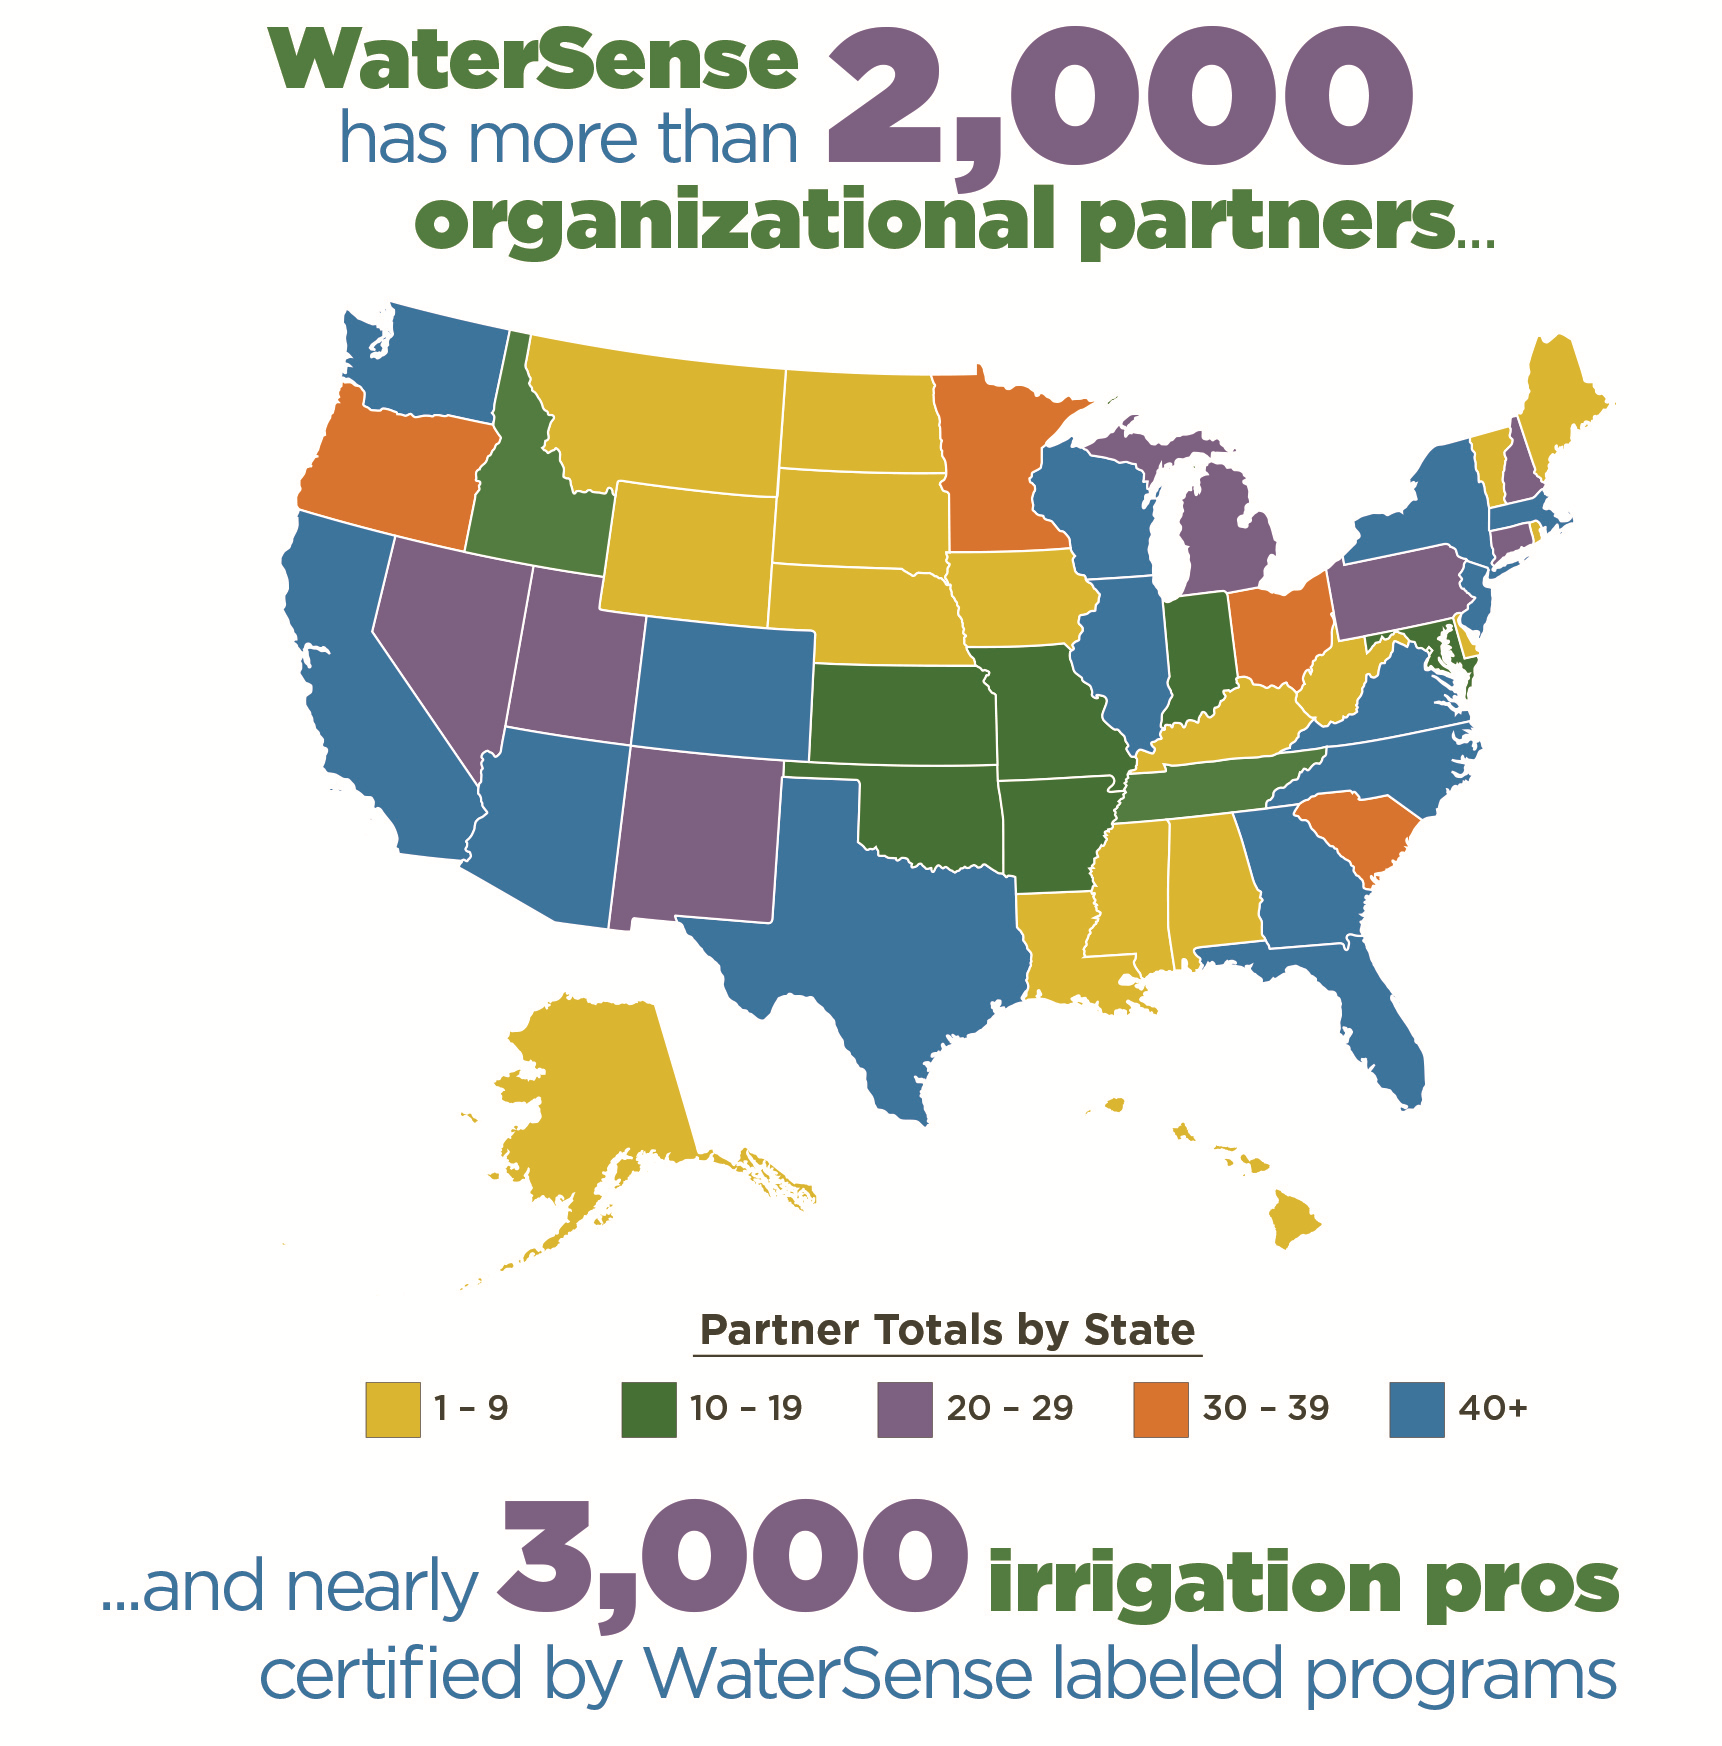 WaterSense has more than 2,000 organizational partners and more than 2,800 irrigation pros certified by WaterSense labeled programs.